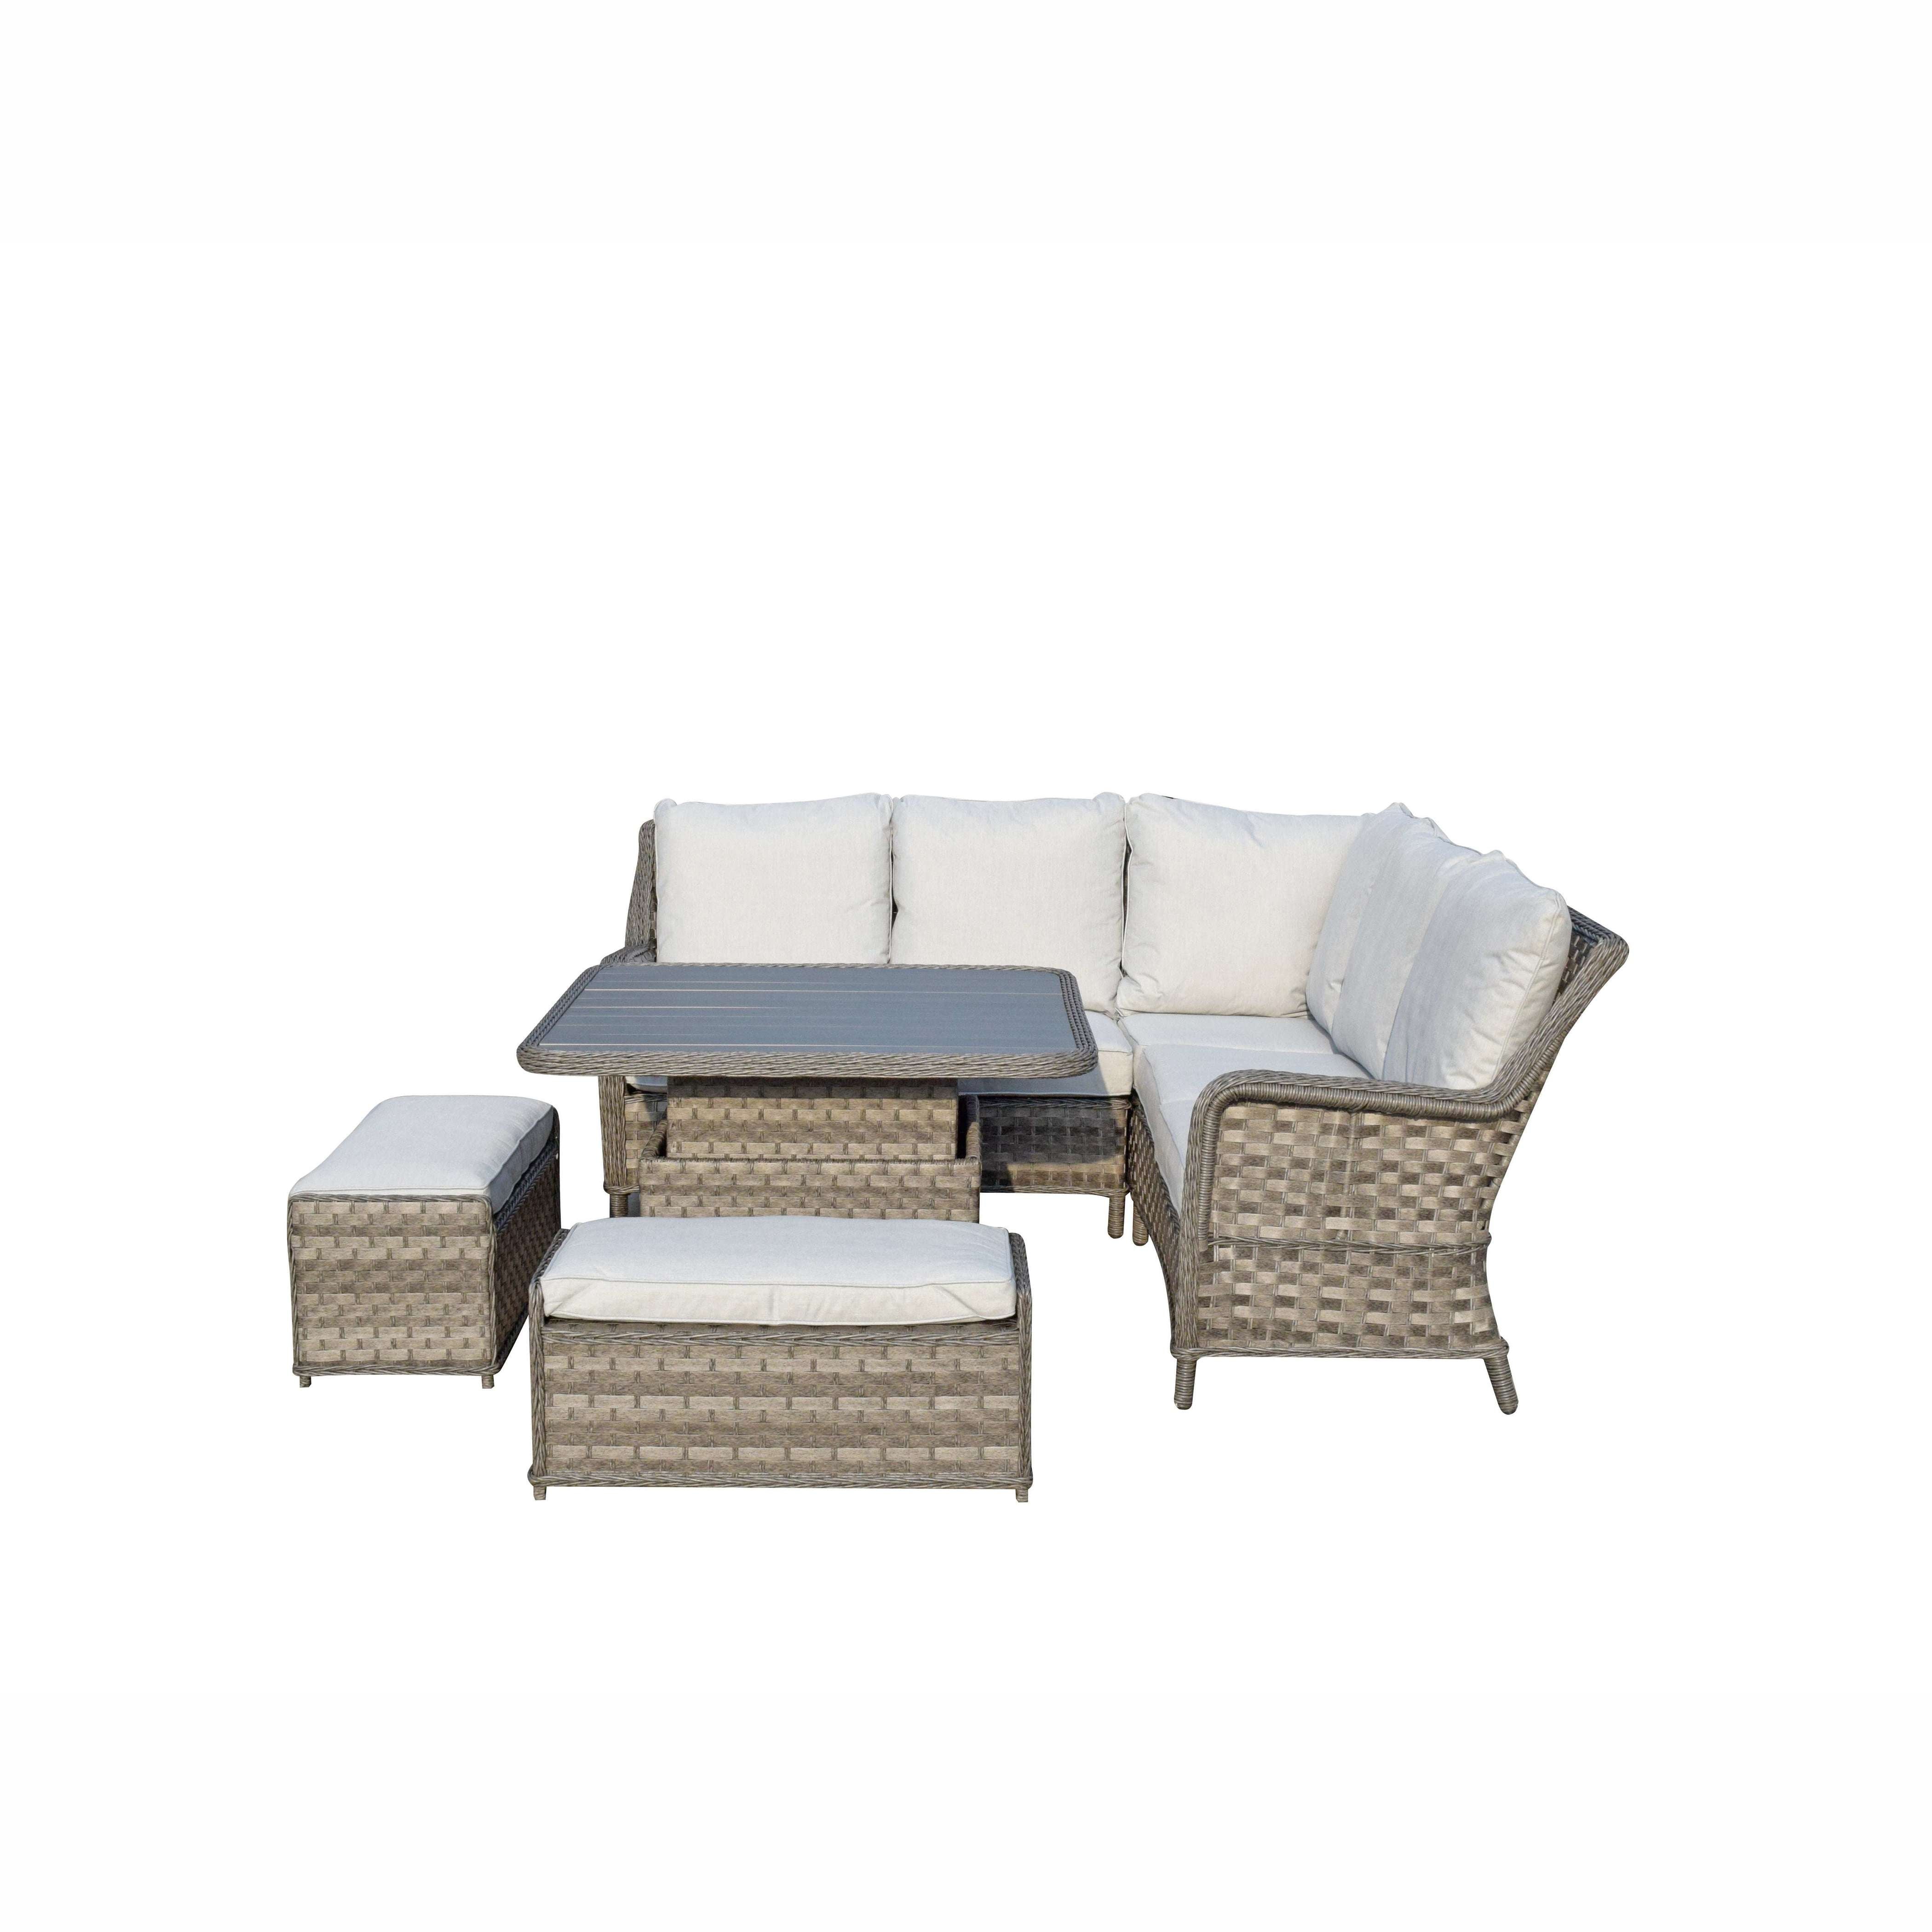 Exceptional Garden:Signature Weave Mia Corner Dining Set with Lifting Table